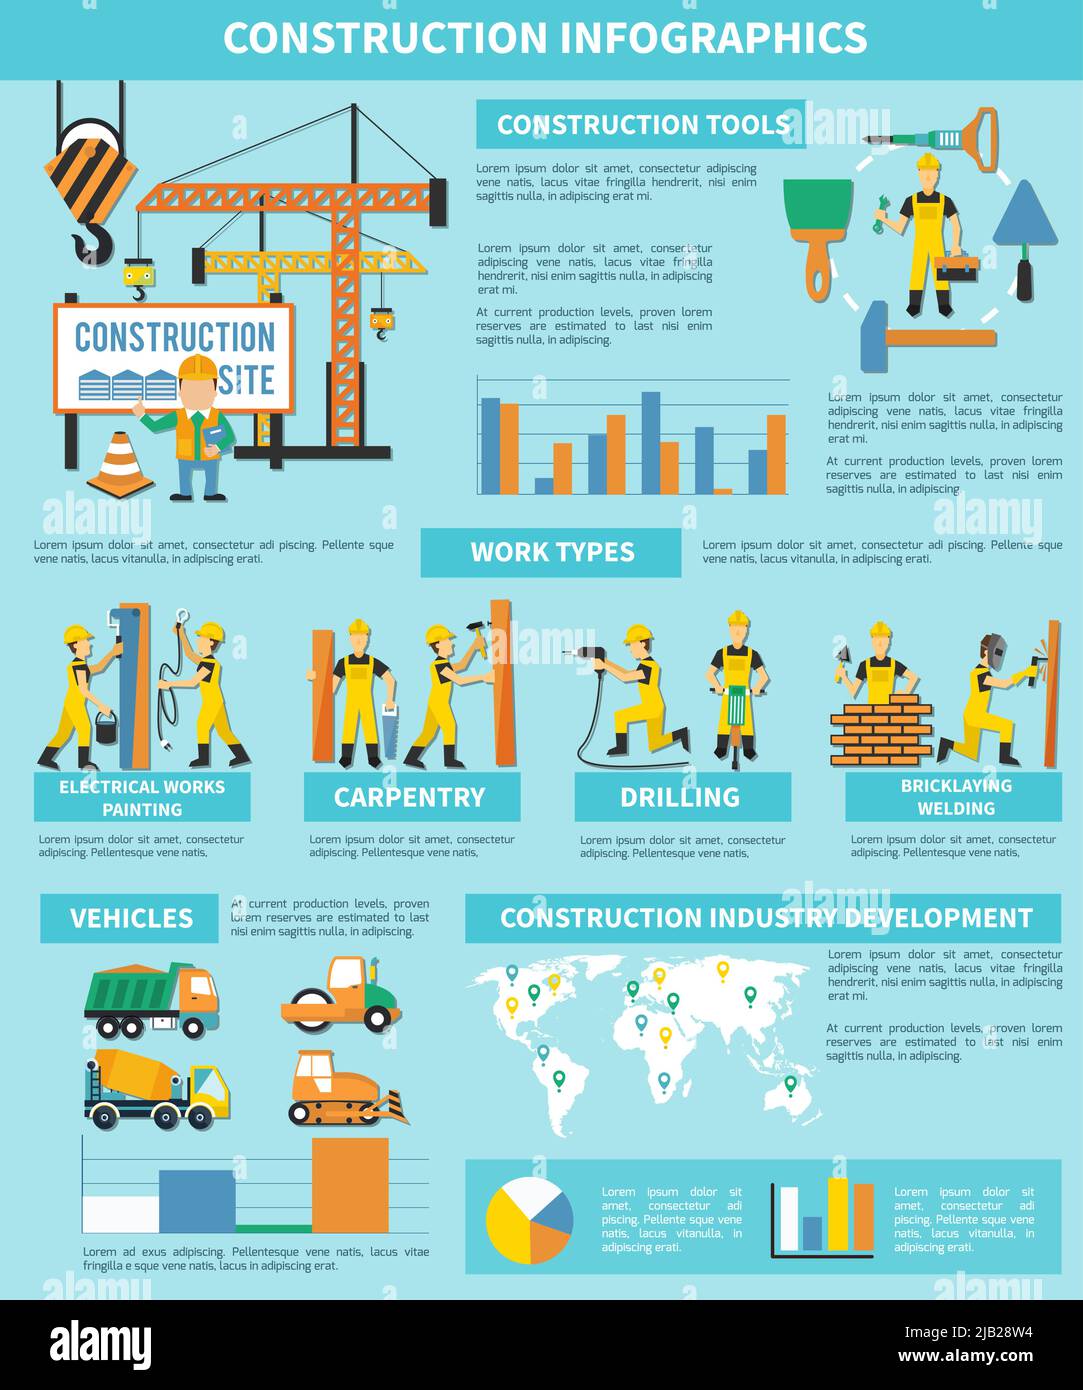 Construction worker infographic with construction tools work types carpentry drilling bricklaying welding par example vehicles descriptions vector ill Stock Vector